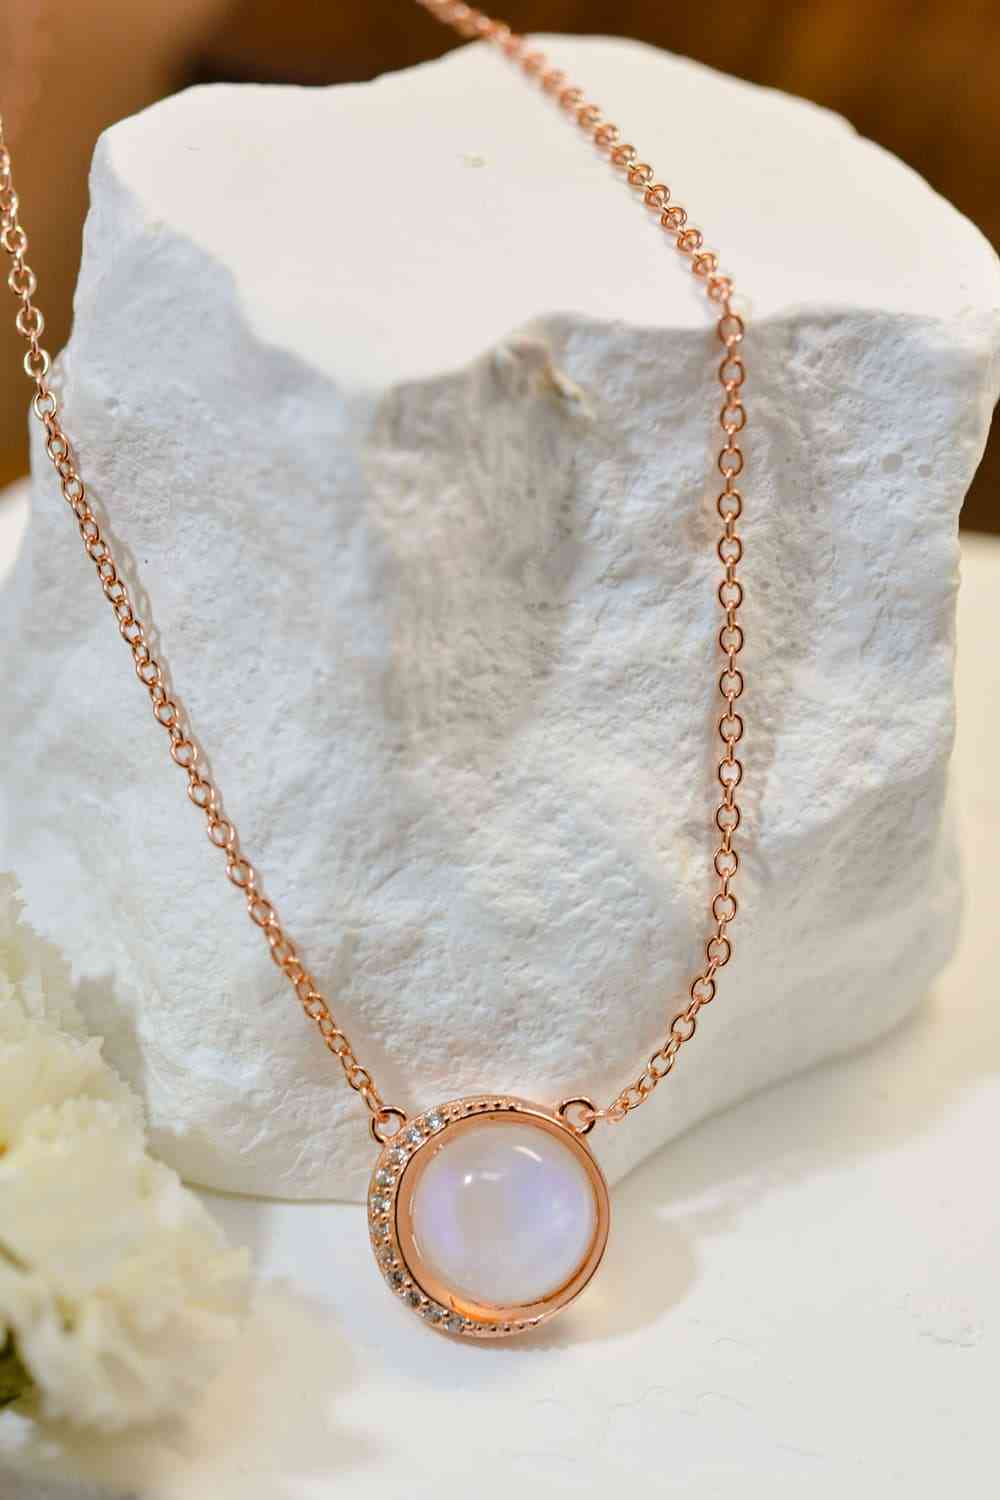 Moonstone Pendant Necklace - 18K Rose Gold-Plated Silver, Crafted for High Quality and Natural Beauty